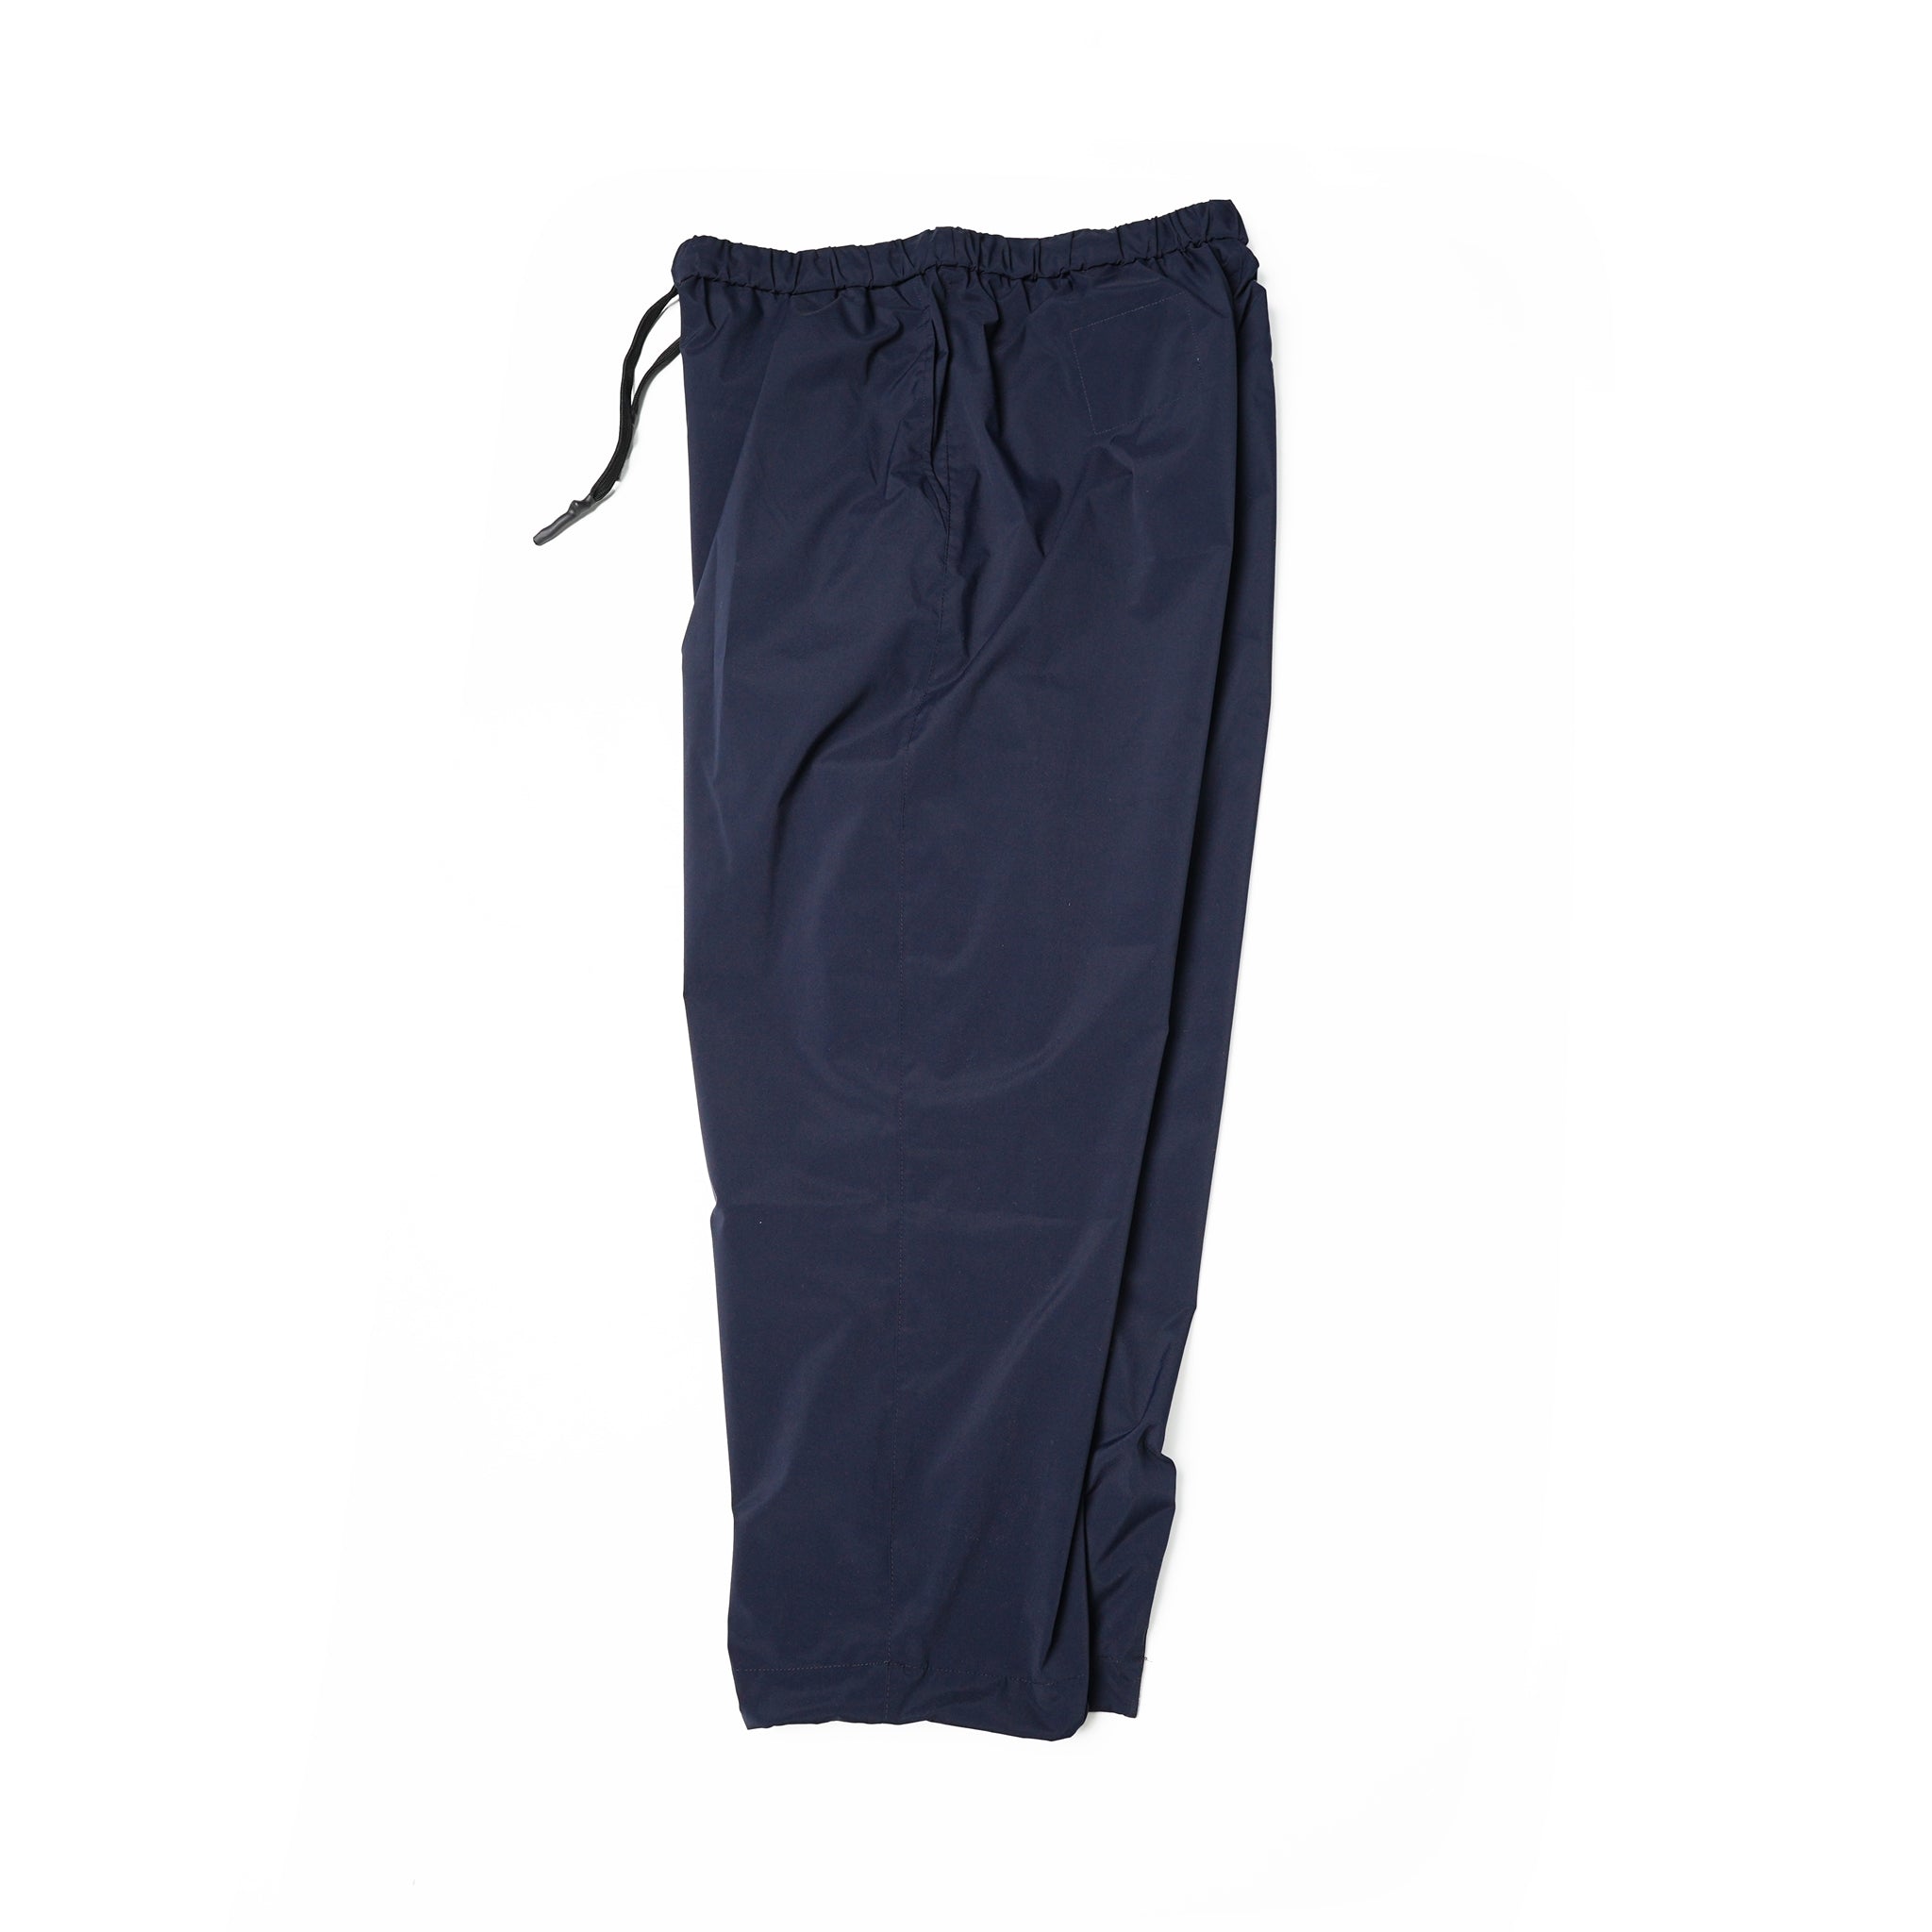 No:UN-014_AW23 | Name:WATER REPELLENT TAPERED STRETCH TRACK PANTS | Color:Dark Navy【UNTRACE_アントレース】